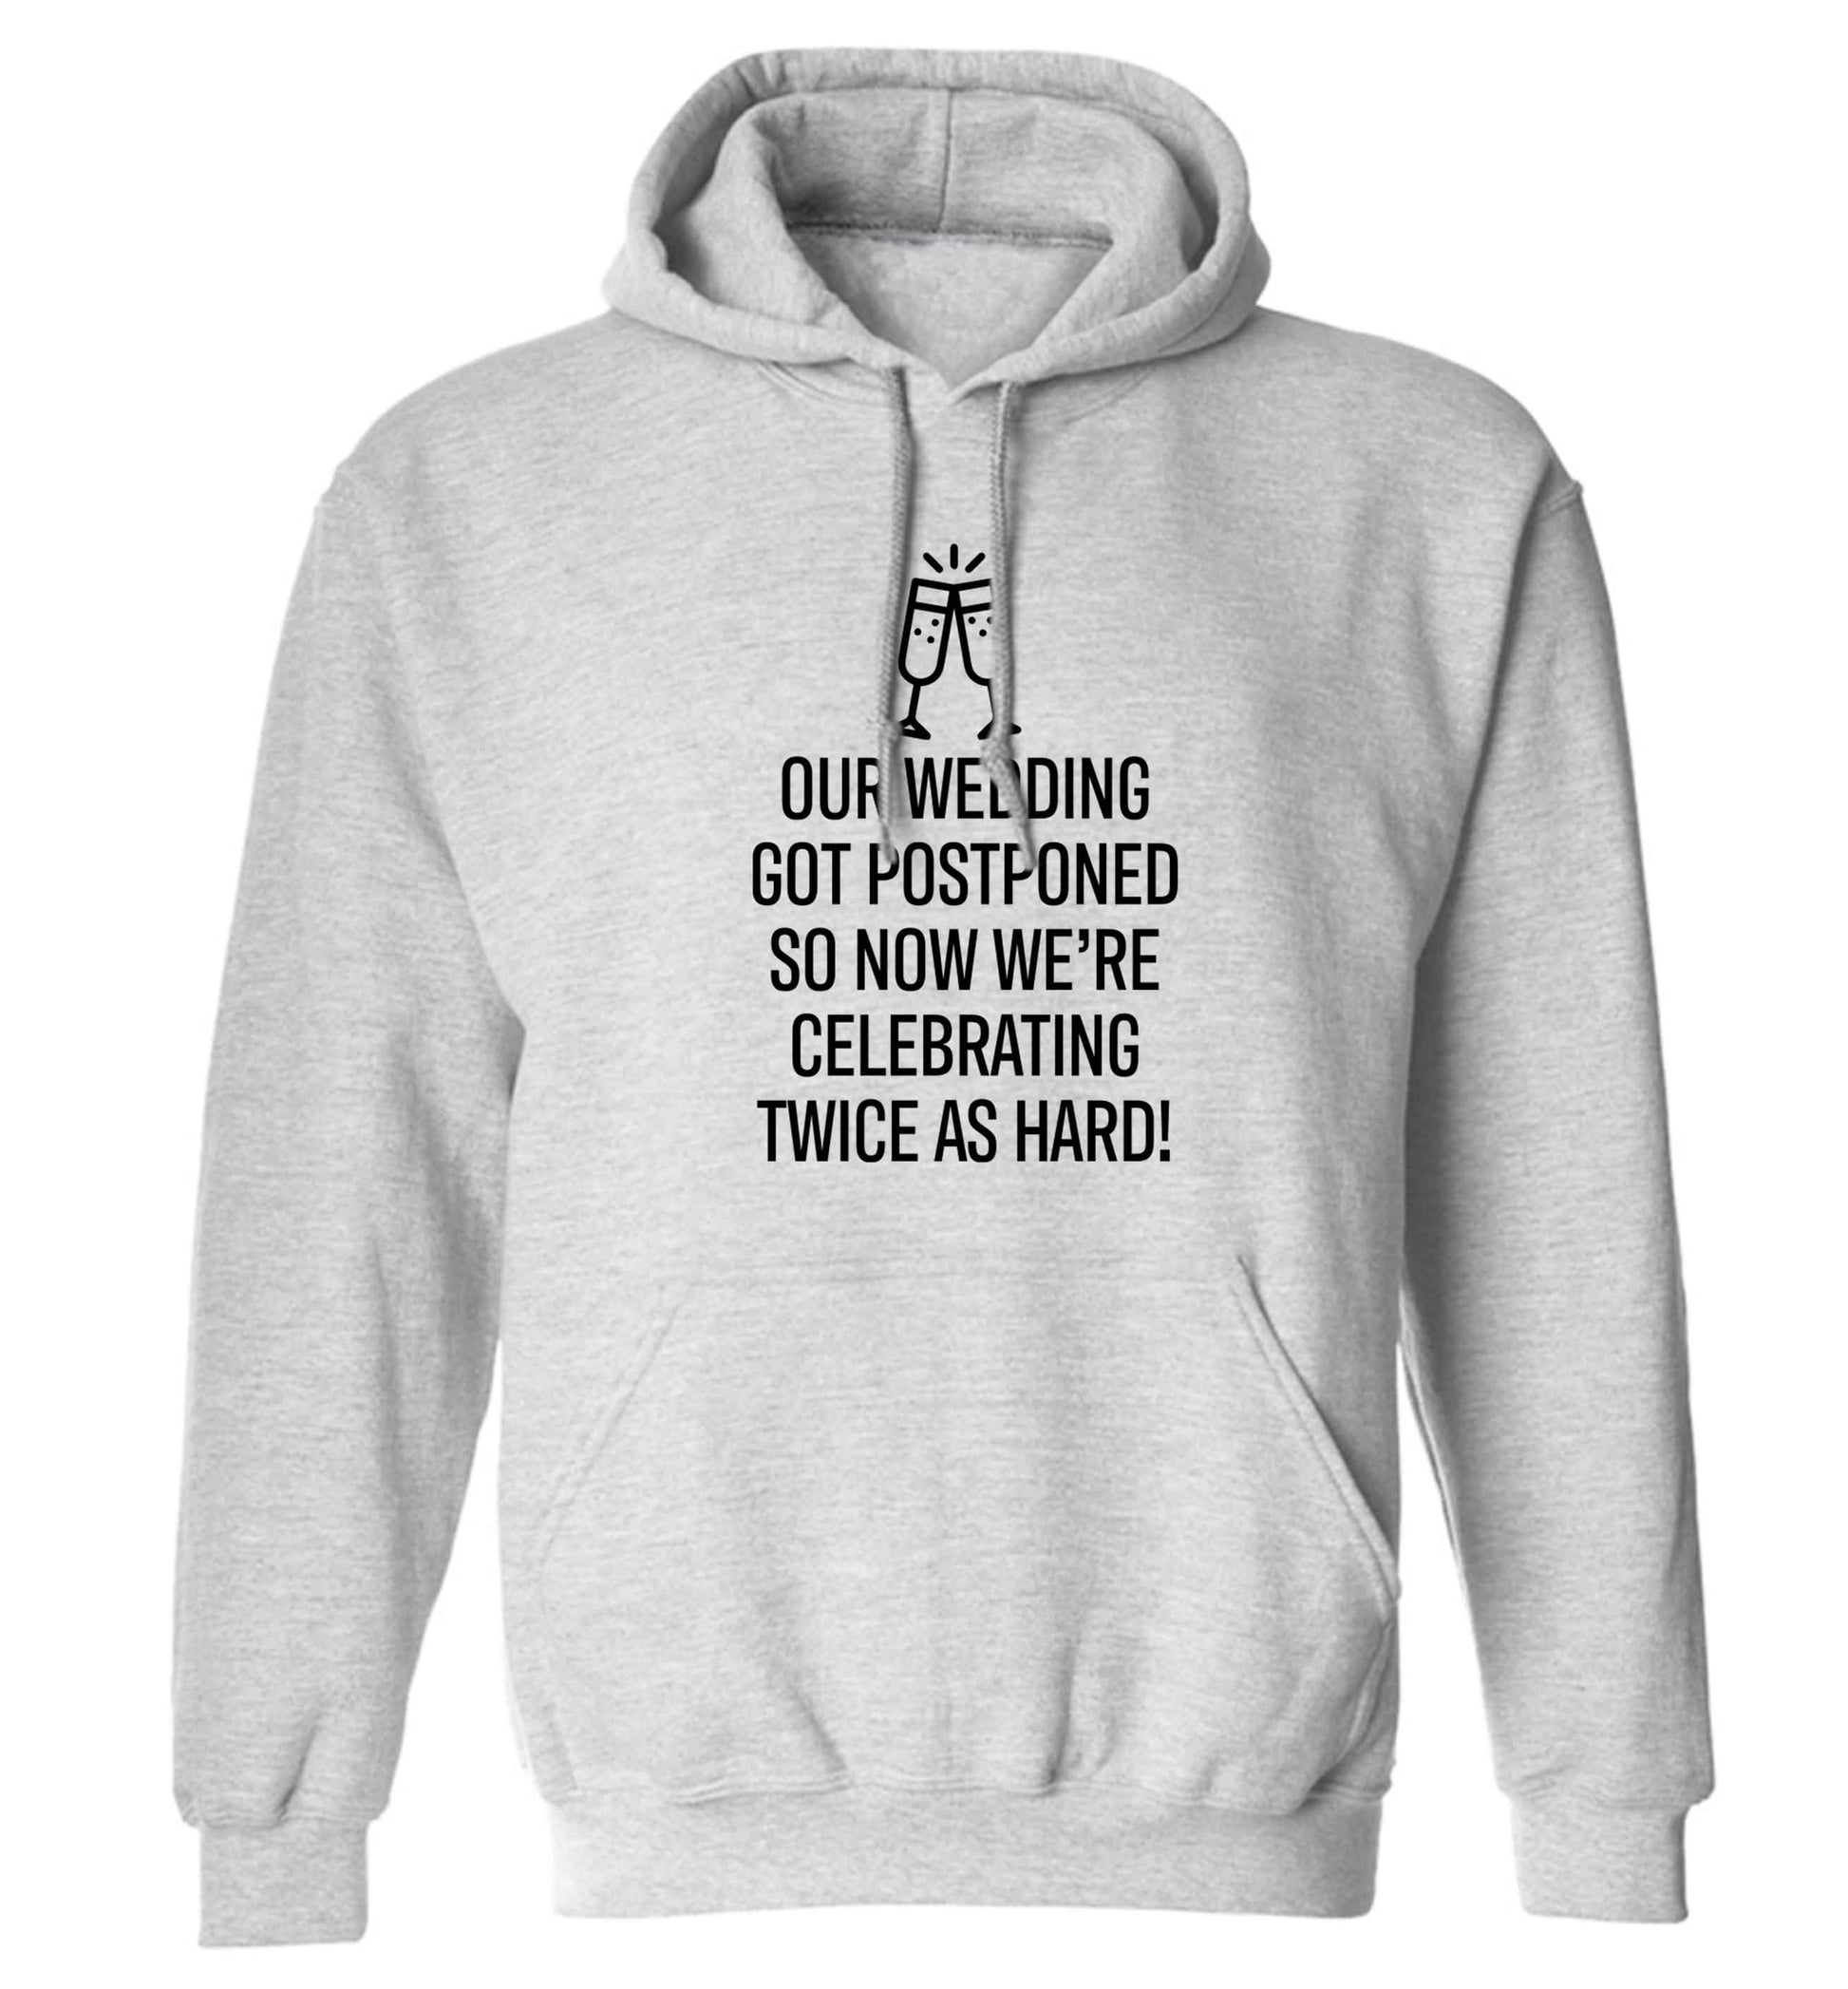 Postponed wedding? Sounds like an excuse to party twice as hard!  adults unisex grey hoodie 2XL